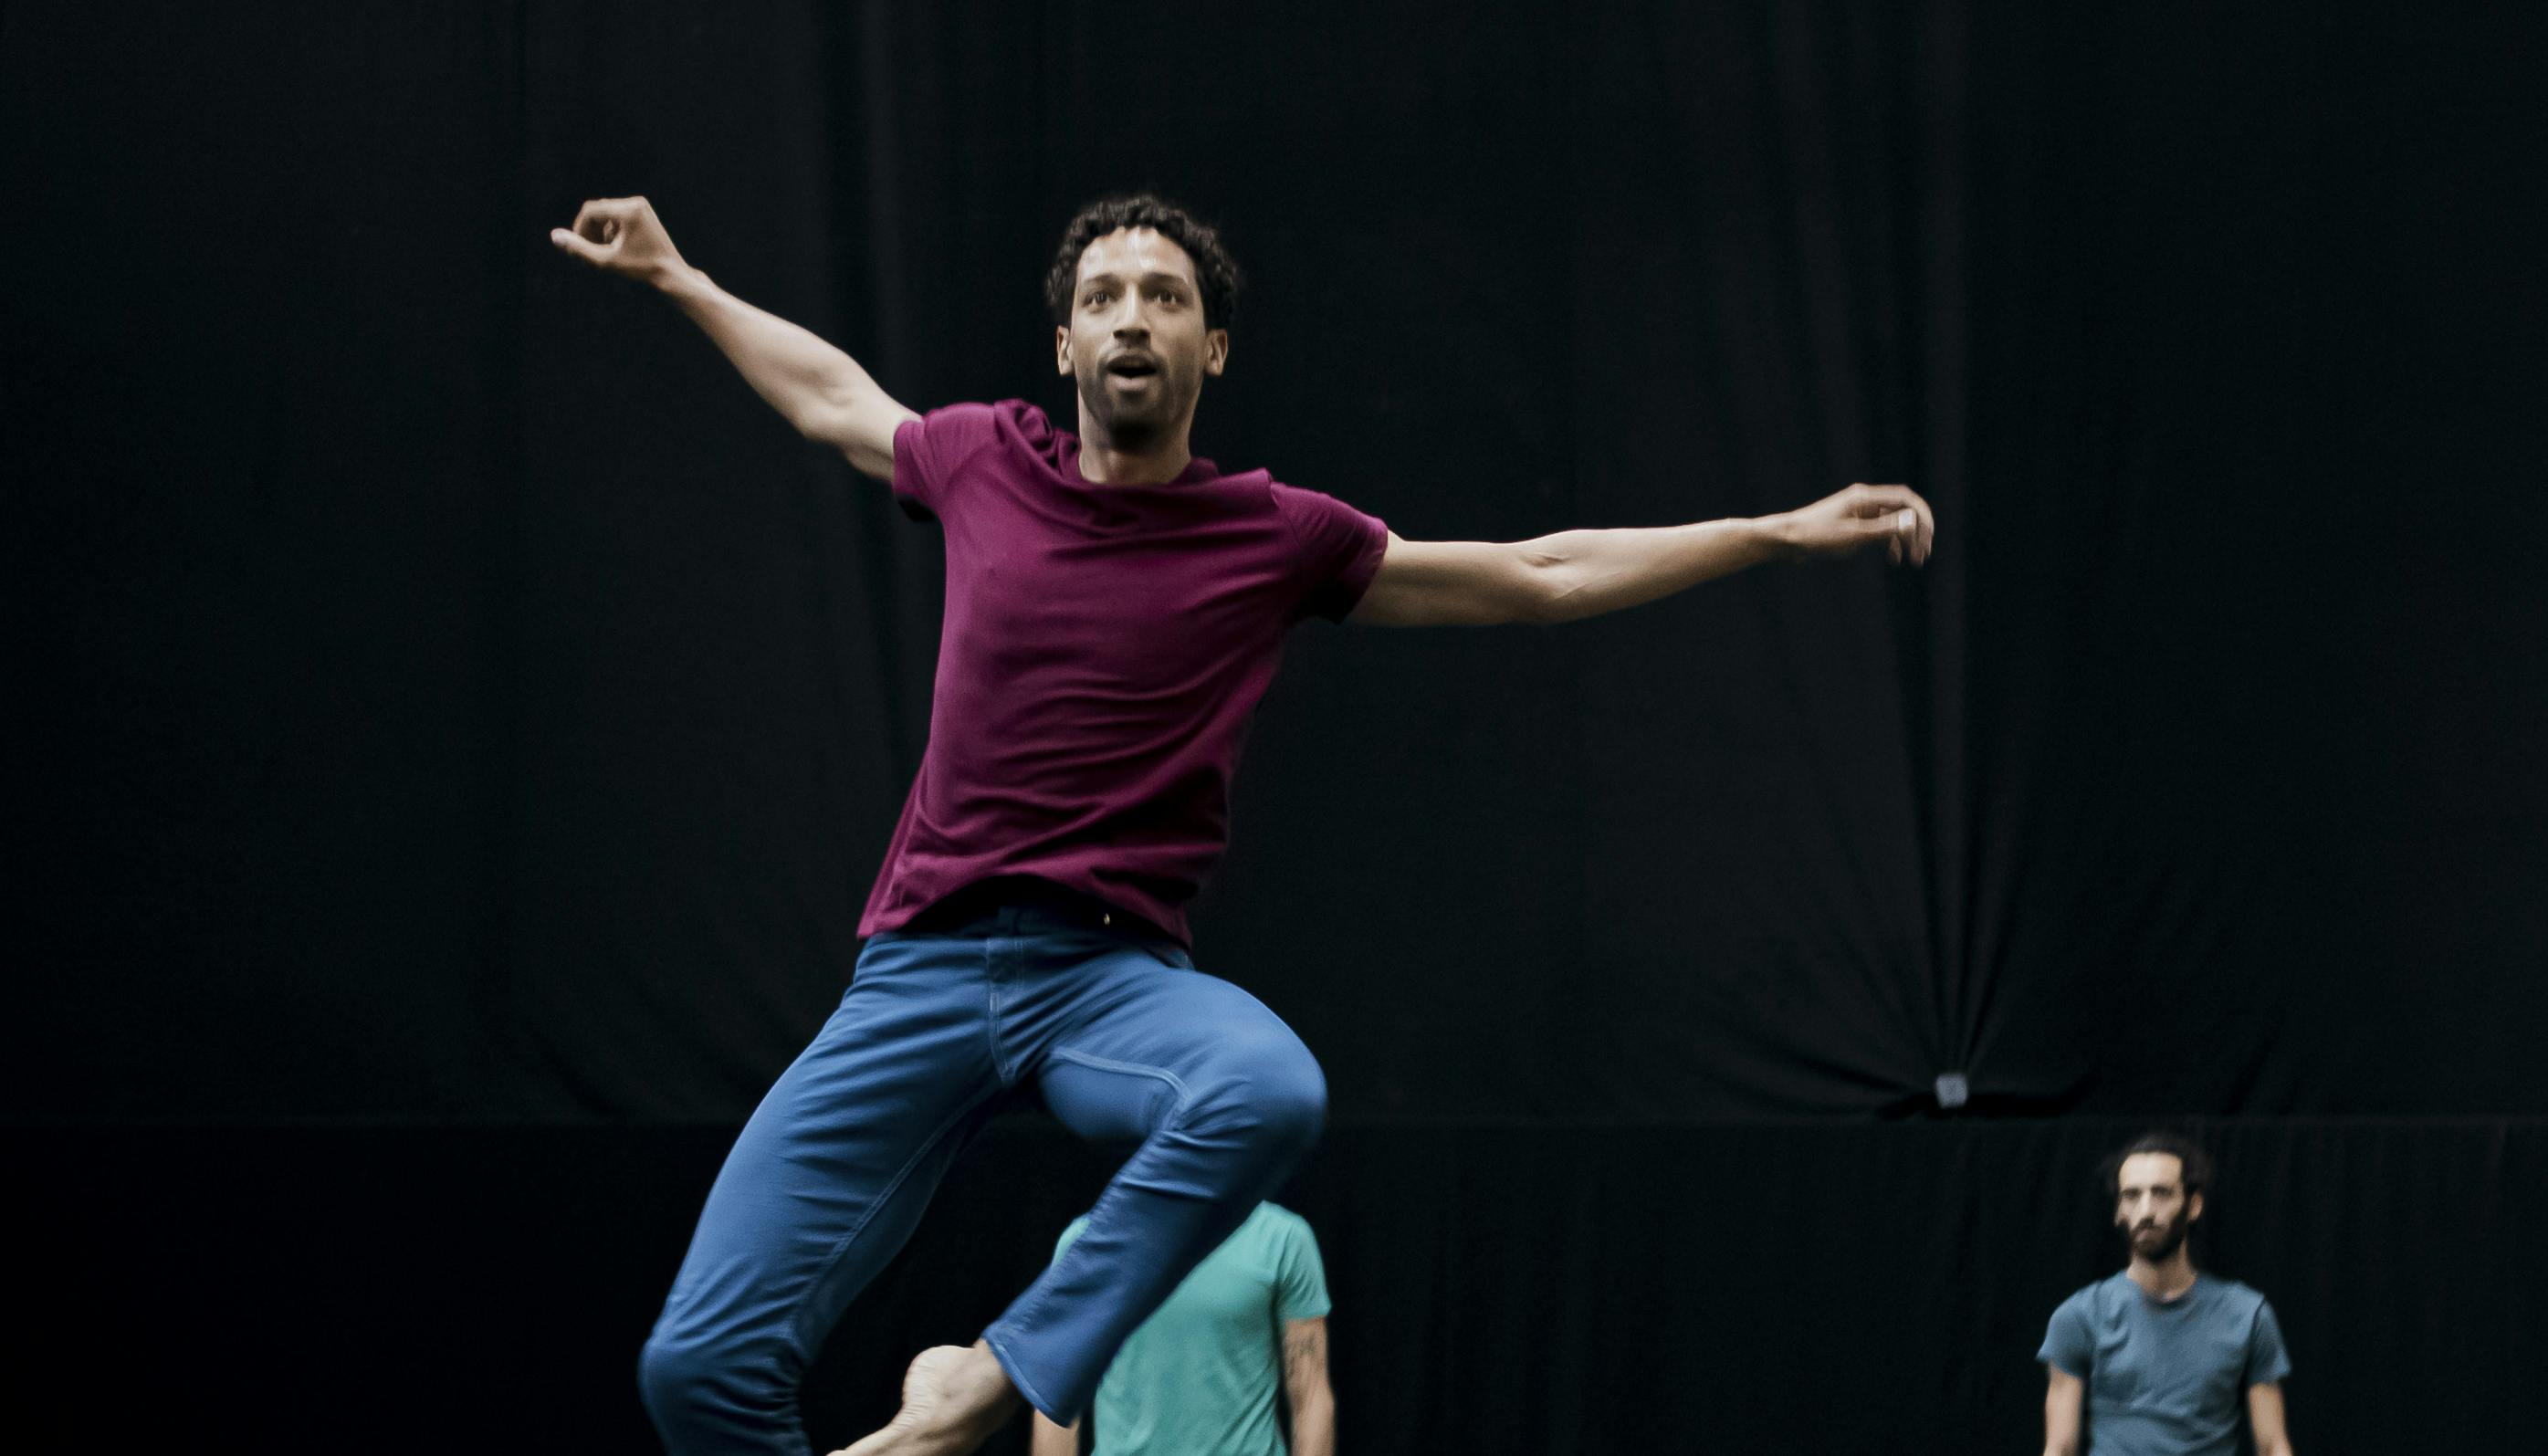 Philippe Kratz performs a jump wearing a burgundy jersey and blue trousers